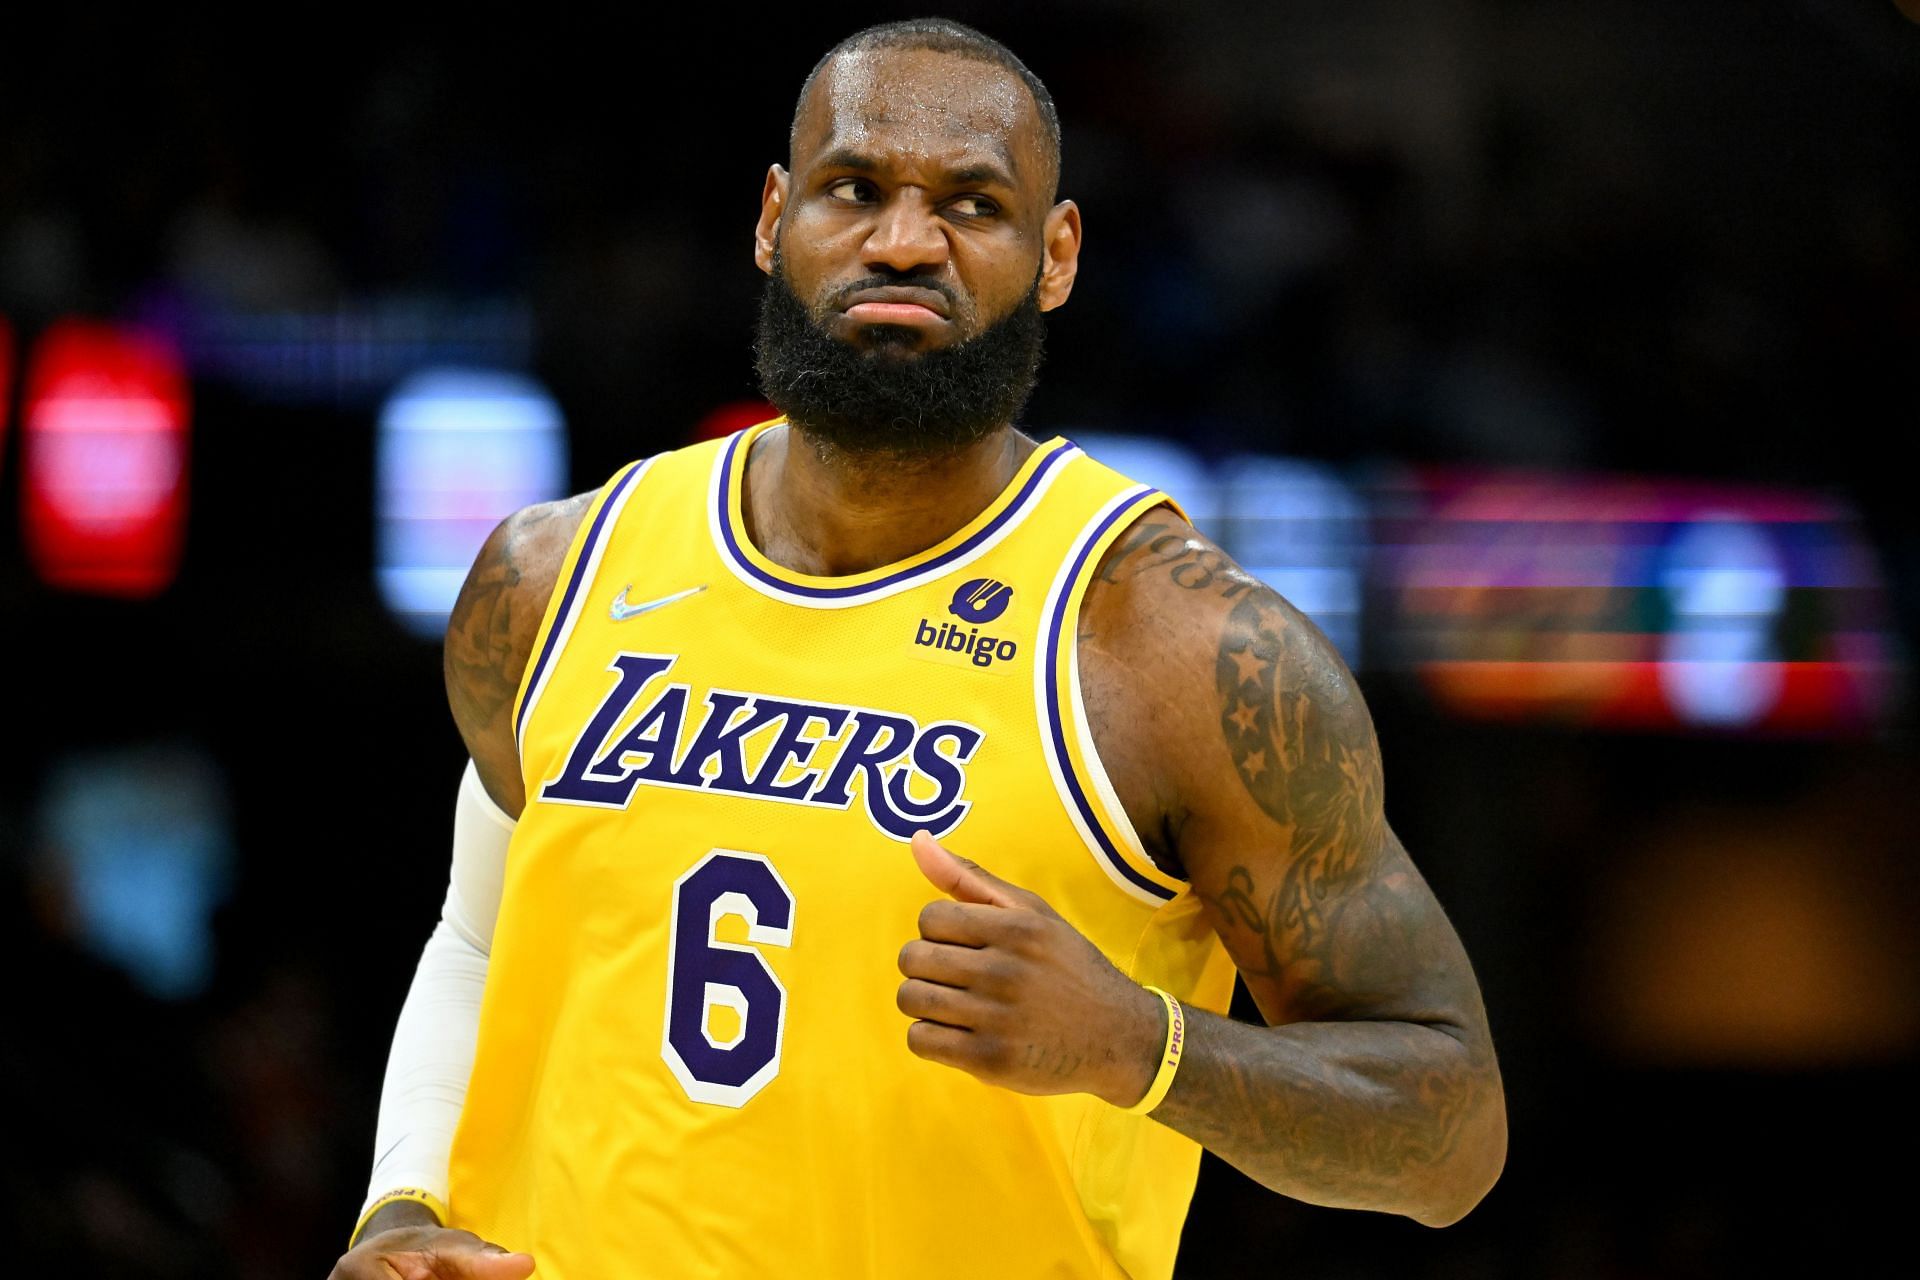 LeBron James of the LA Lakers celebrates during the fourth quarter against the Cleveland Cavaliers on March 21 in Cleveland, Ohio. The Lakers defeated the Cavaliers 131-120.